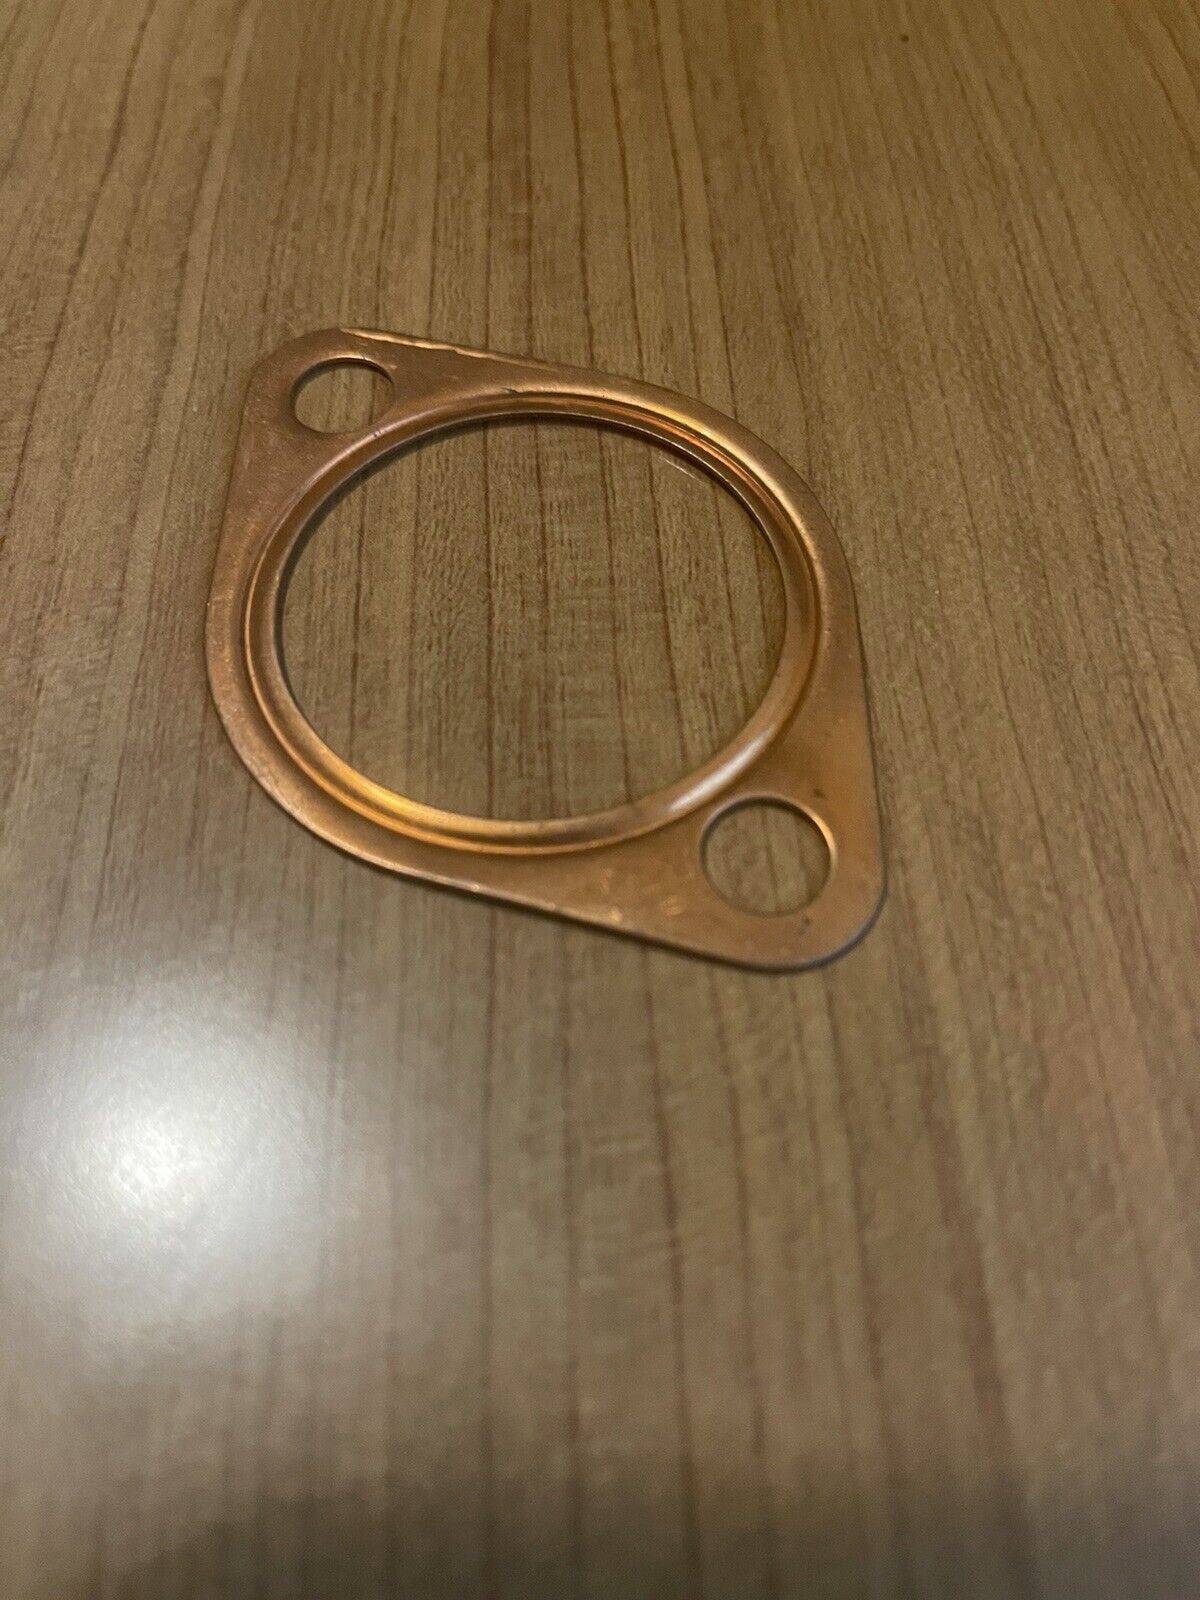 1 ea Lycoming Copper Exhaust Gasket, P/N 161, NOS AIRBORNE